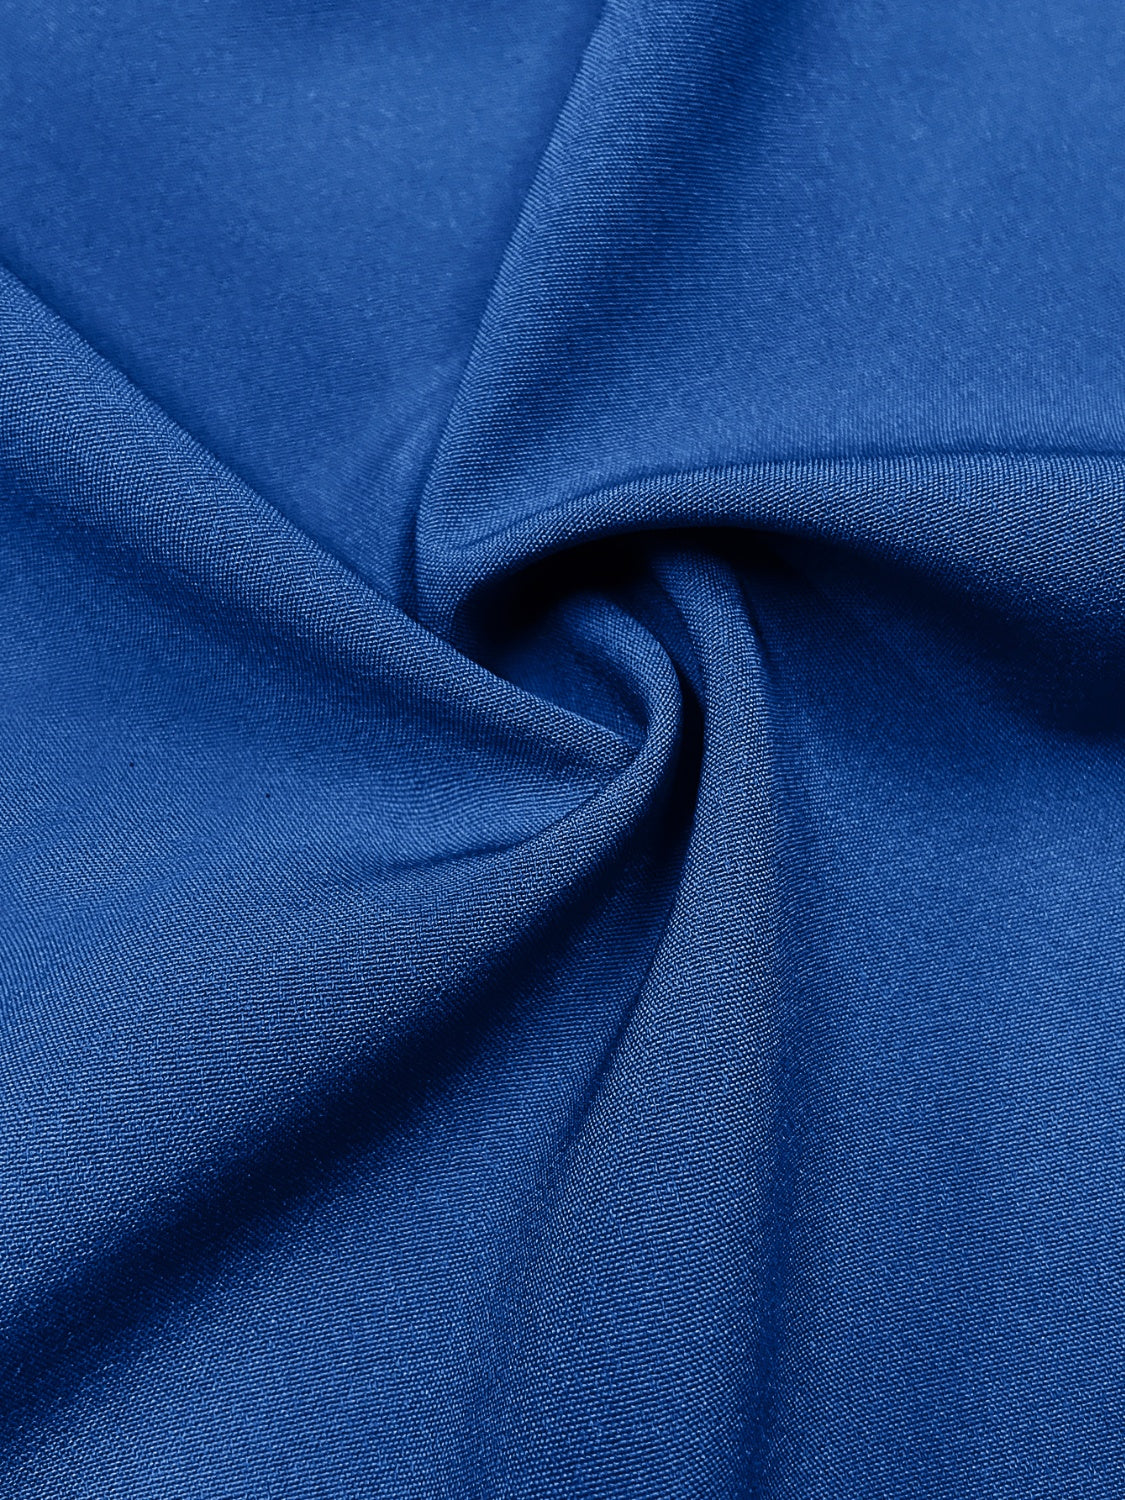 Close up of blue fabric used in high low blouse